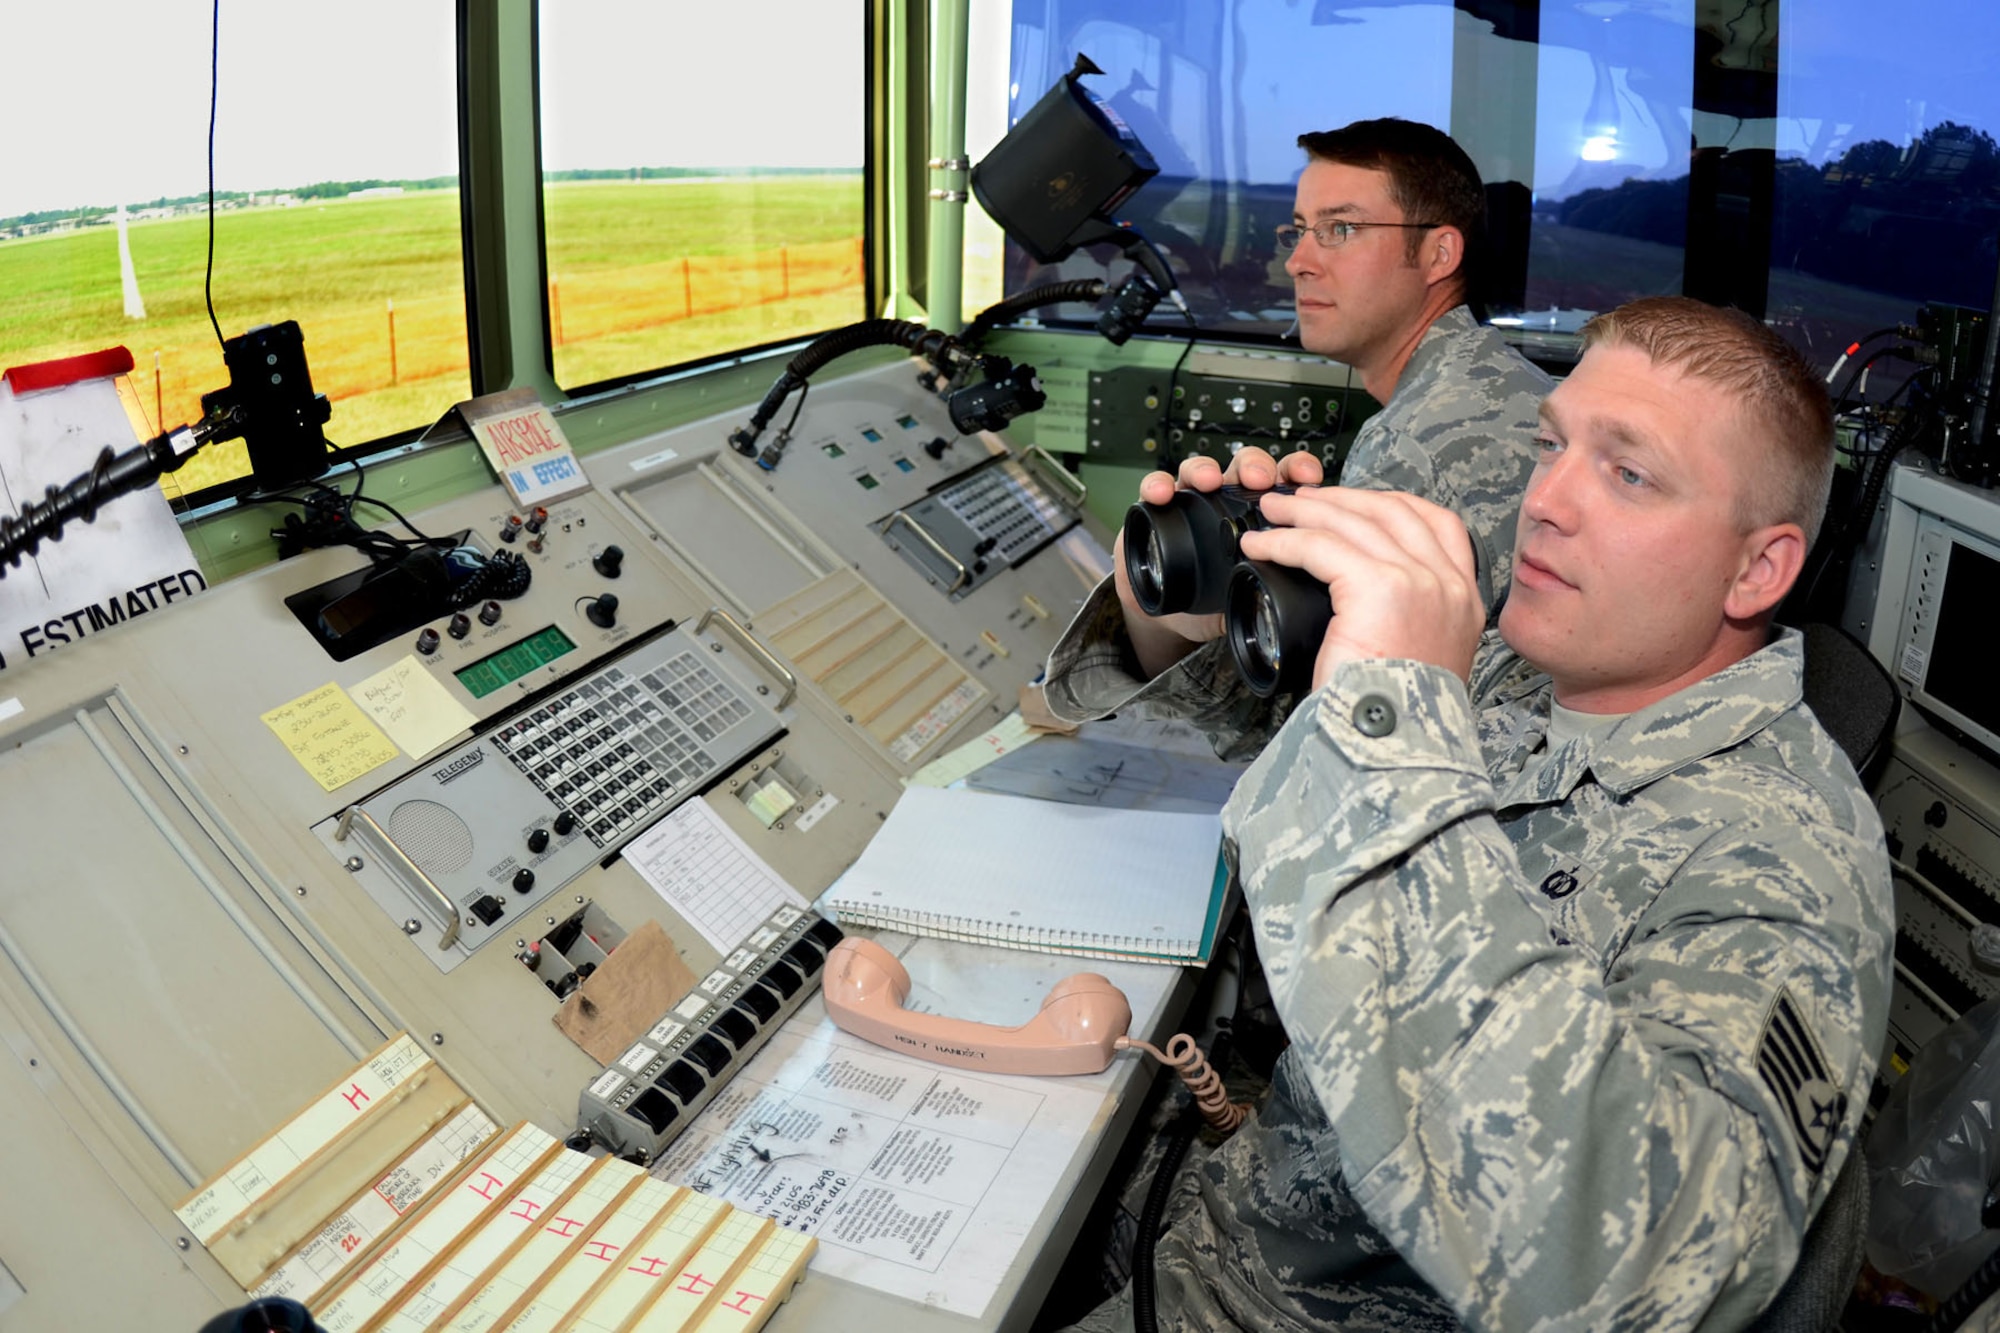 U.S. Air Force Tech. Sgt. David Kaylor, an air traffic controller with the 245th Air Traffic Control Squadron at McEntire Joint National Guard Base, South Carolina Air National Guard, works in the 245th's mobile tower set up at Shaw Air Force Base in Sumter S.C., with Tech. Sgt. Keith Wilbur, air traffic control watch supervisor with the 20th Operations Support Squadron at Shaw AFB, June 13, 2013. The 245th sent a team of ATCS personnel to Shaw to set up and train Shaw's controllers on operating the mobile tower while renovations are being made to their control tower. (U.S. Air National Guard photo by Tech. Sgt. Caycee Watson/Released)